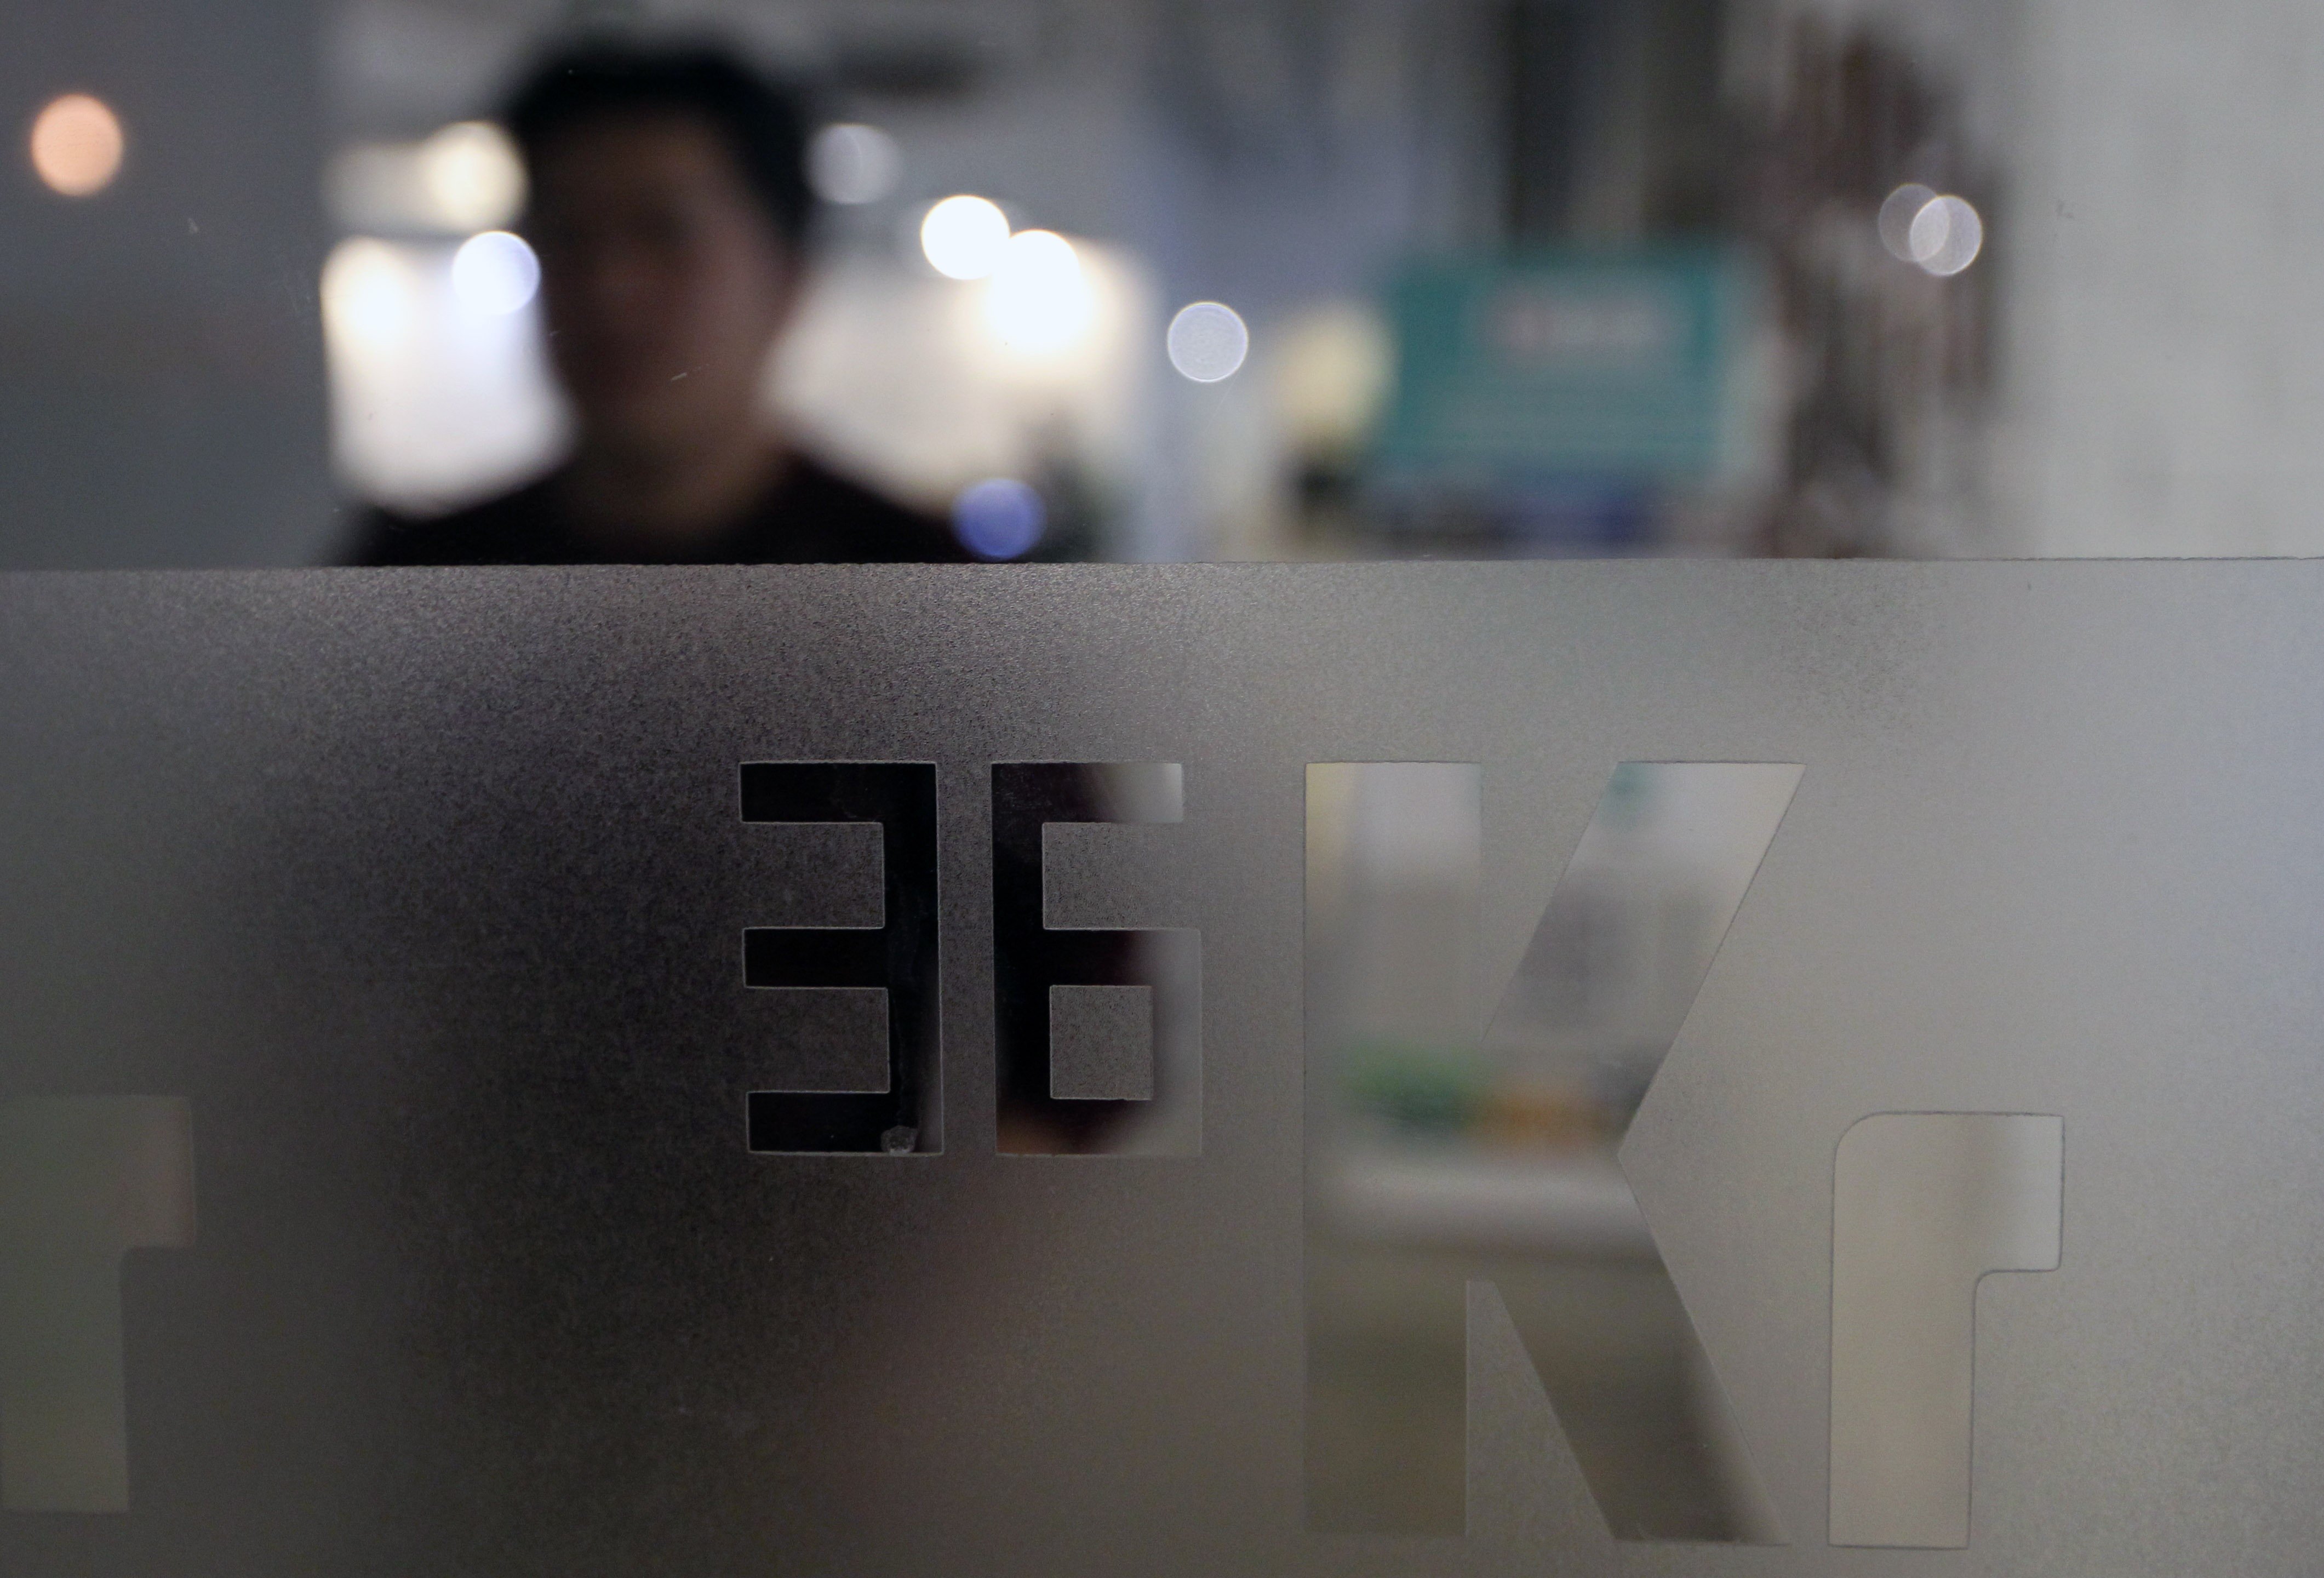 Kr Space, a spin-off of technology platform 36kr.com, has confirmed it will not take up space in One Hennessy. Photo: Simon Song